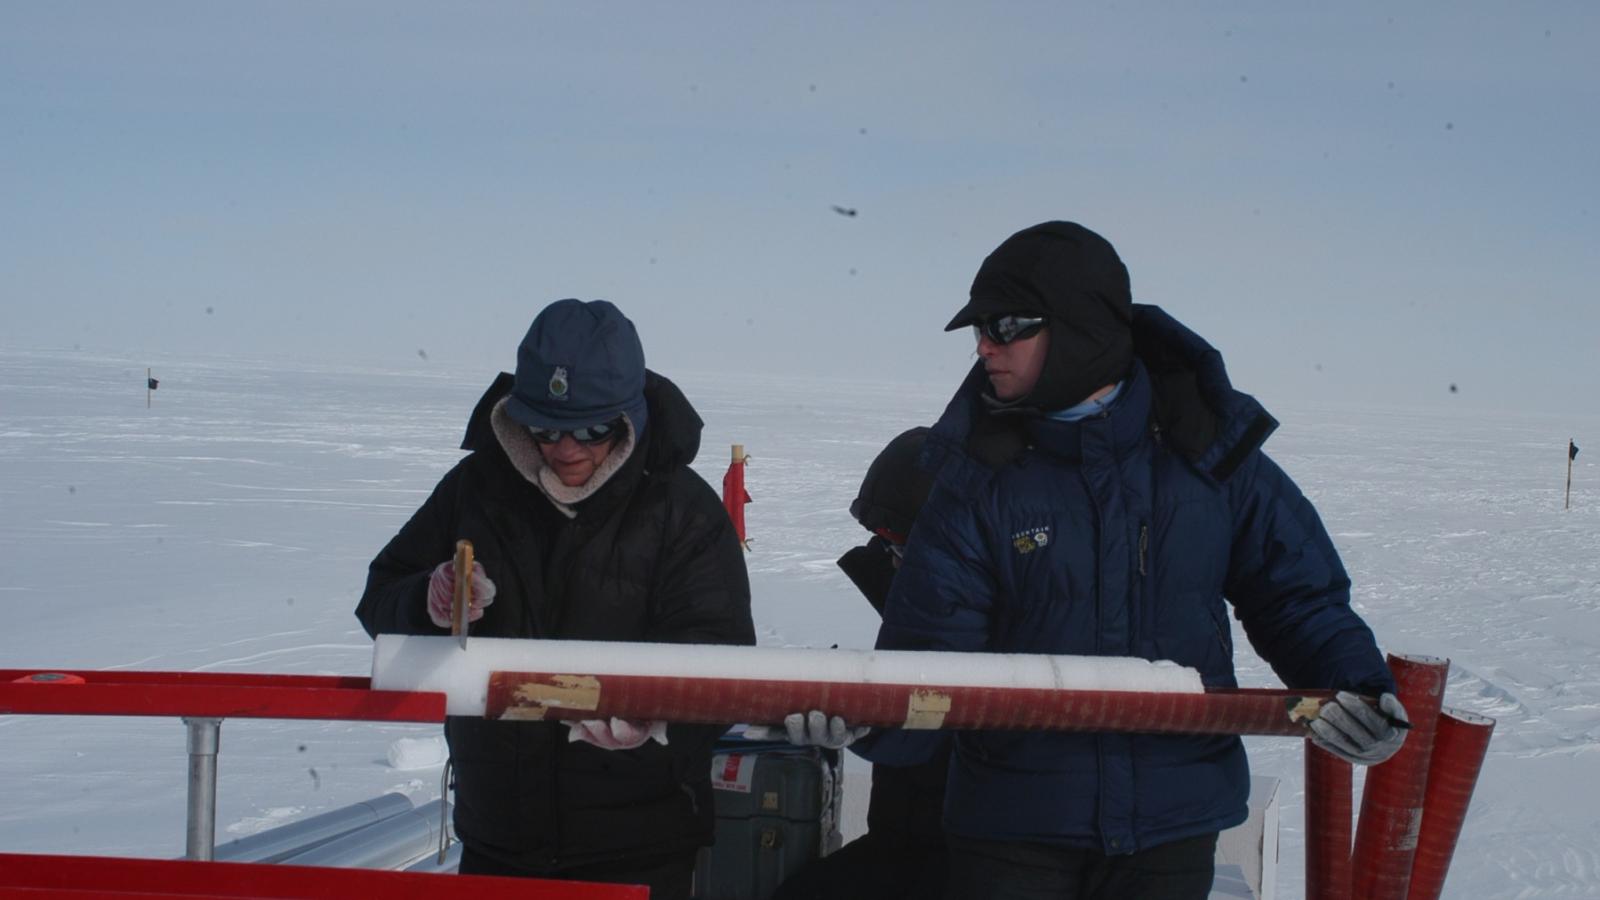 2 team members collaborate in the field. The landscape is gray and snowy 